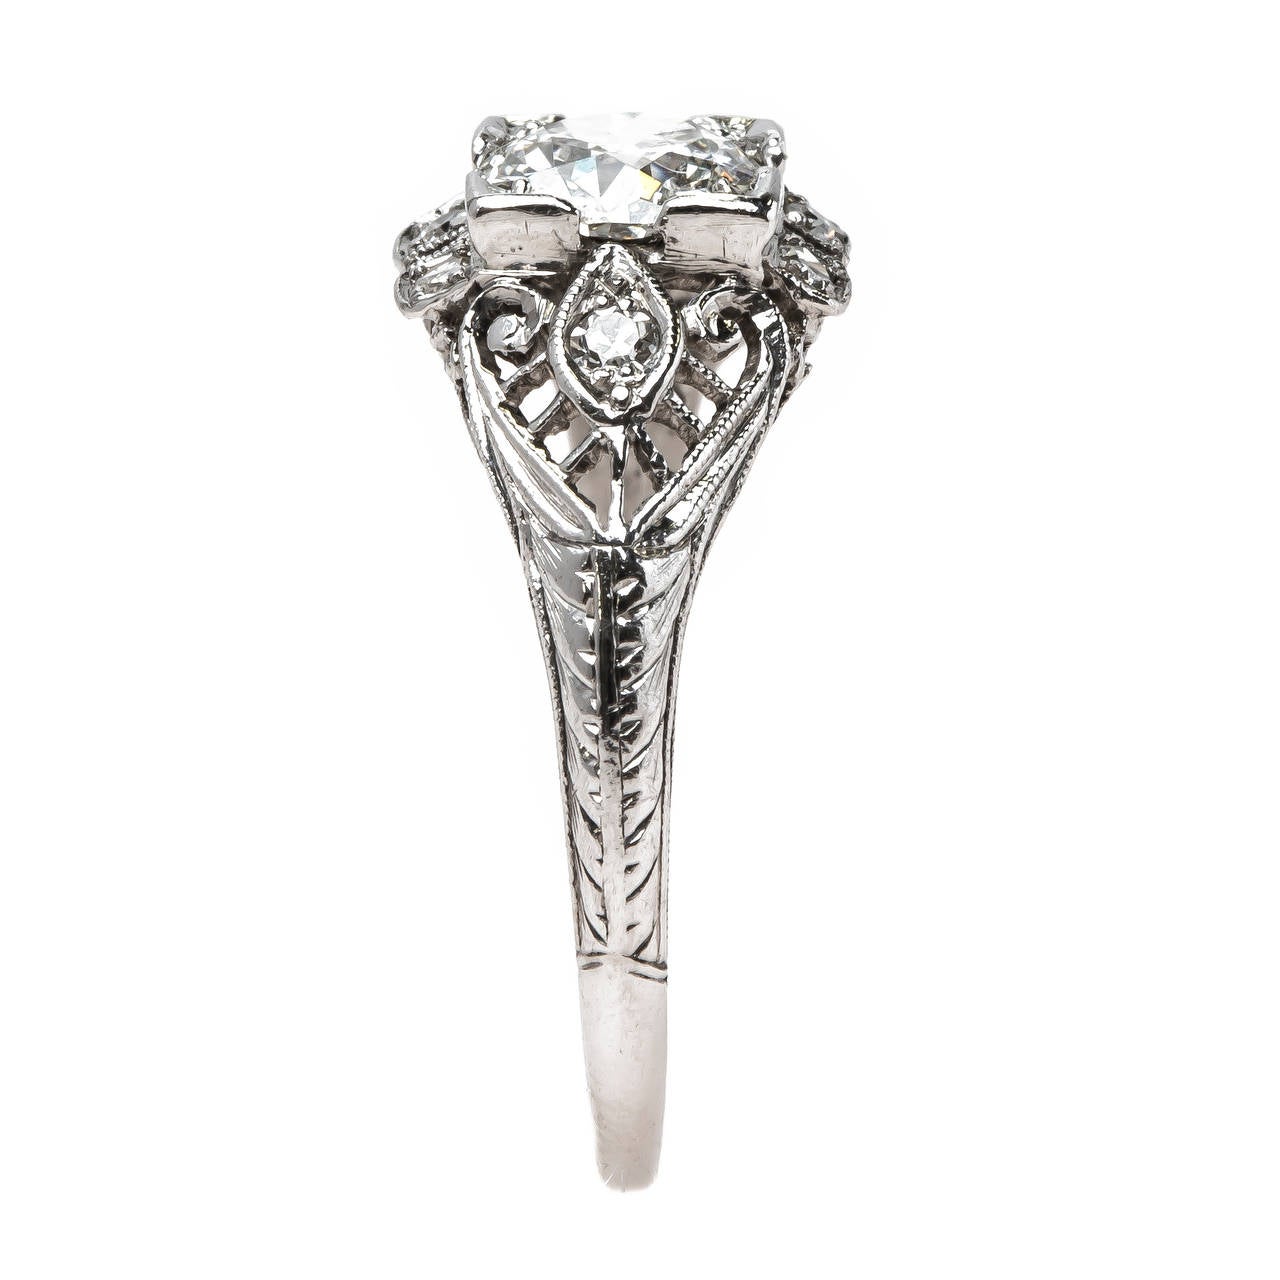 Women's One-of-a-Kind Handcrafted Edwardian Ring with Old Mine Brilliant Cut Diamond